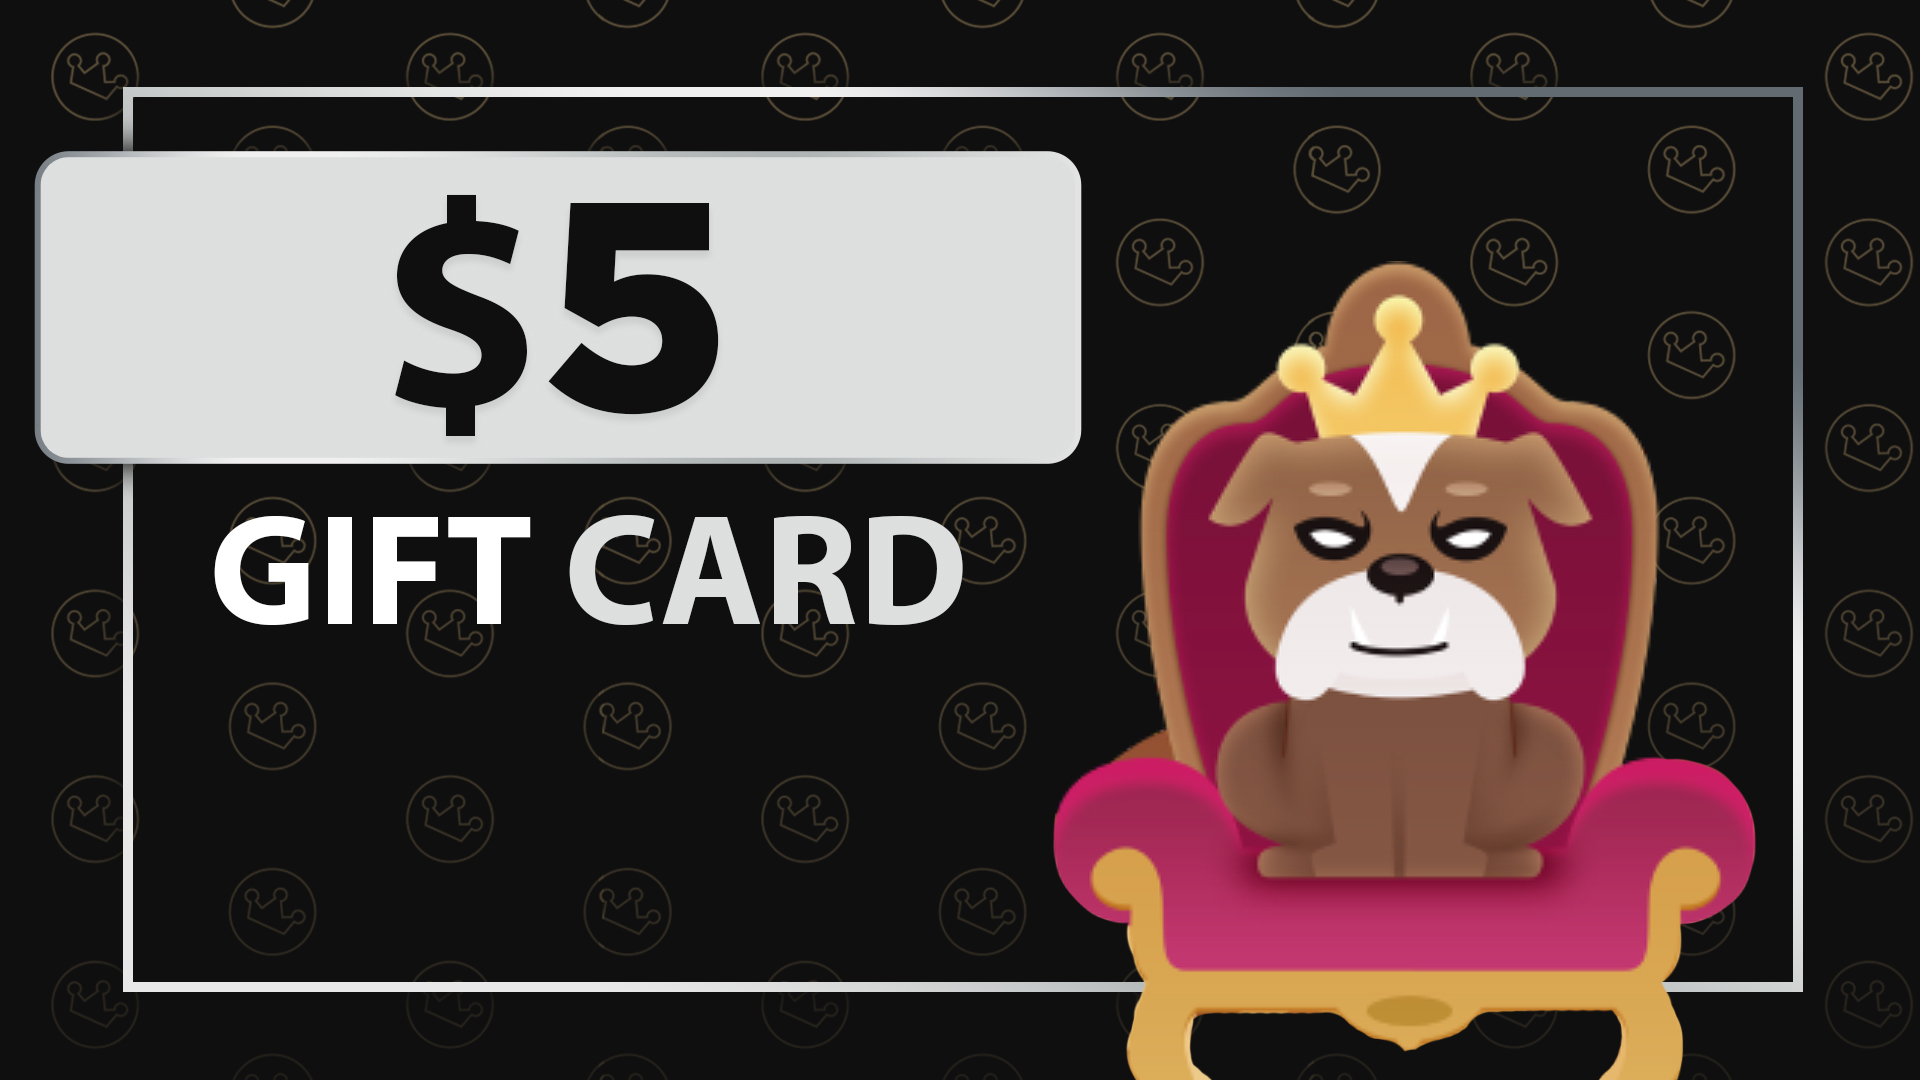 RoyaleCases $5 USD Gift Card 6.09 usd